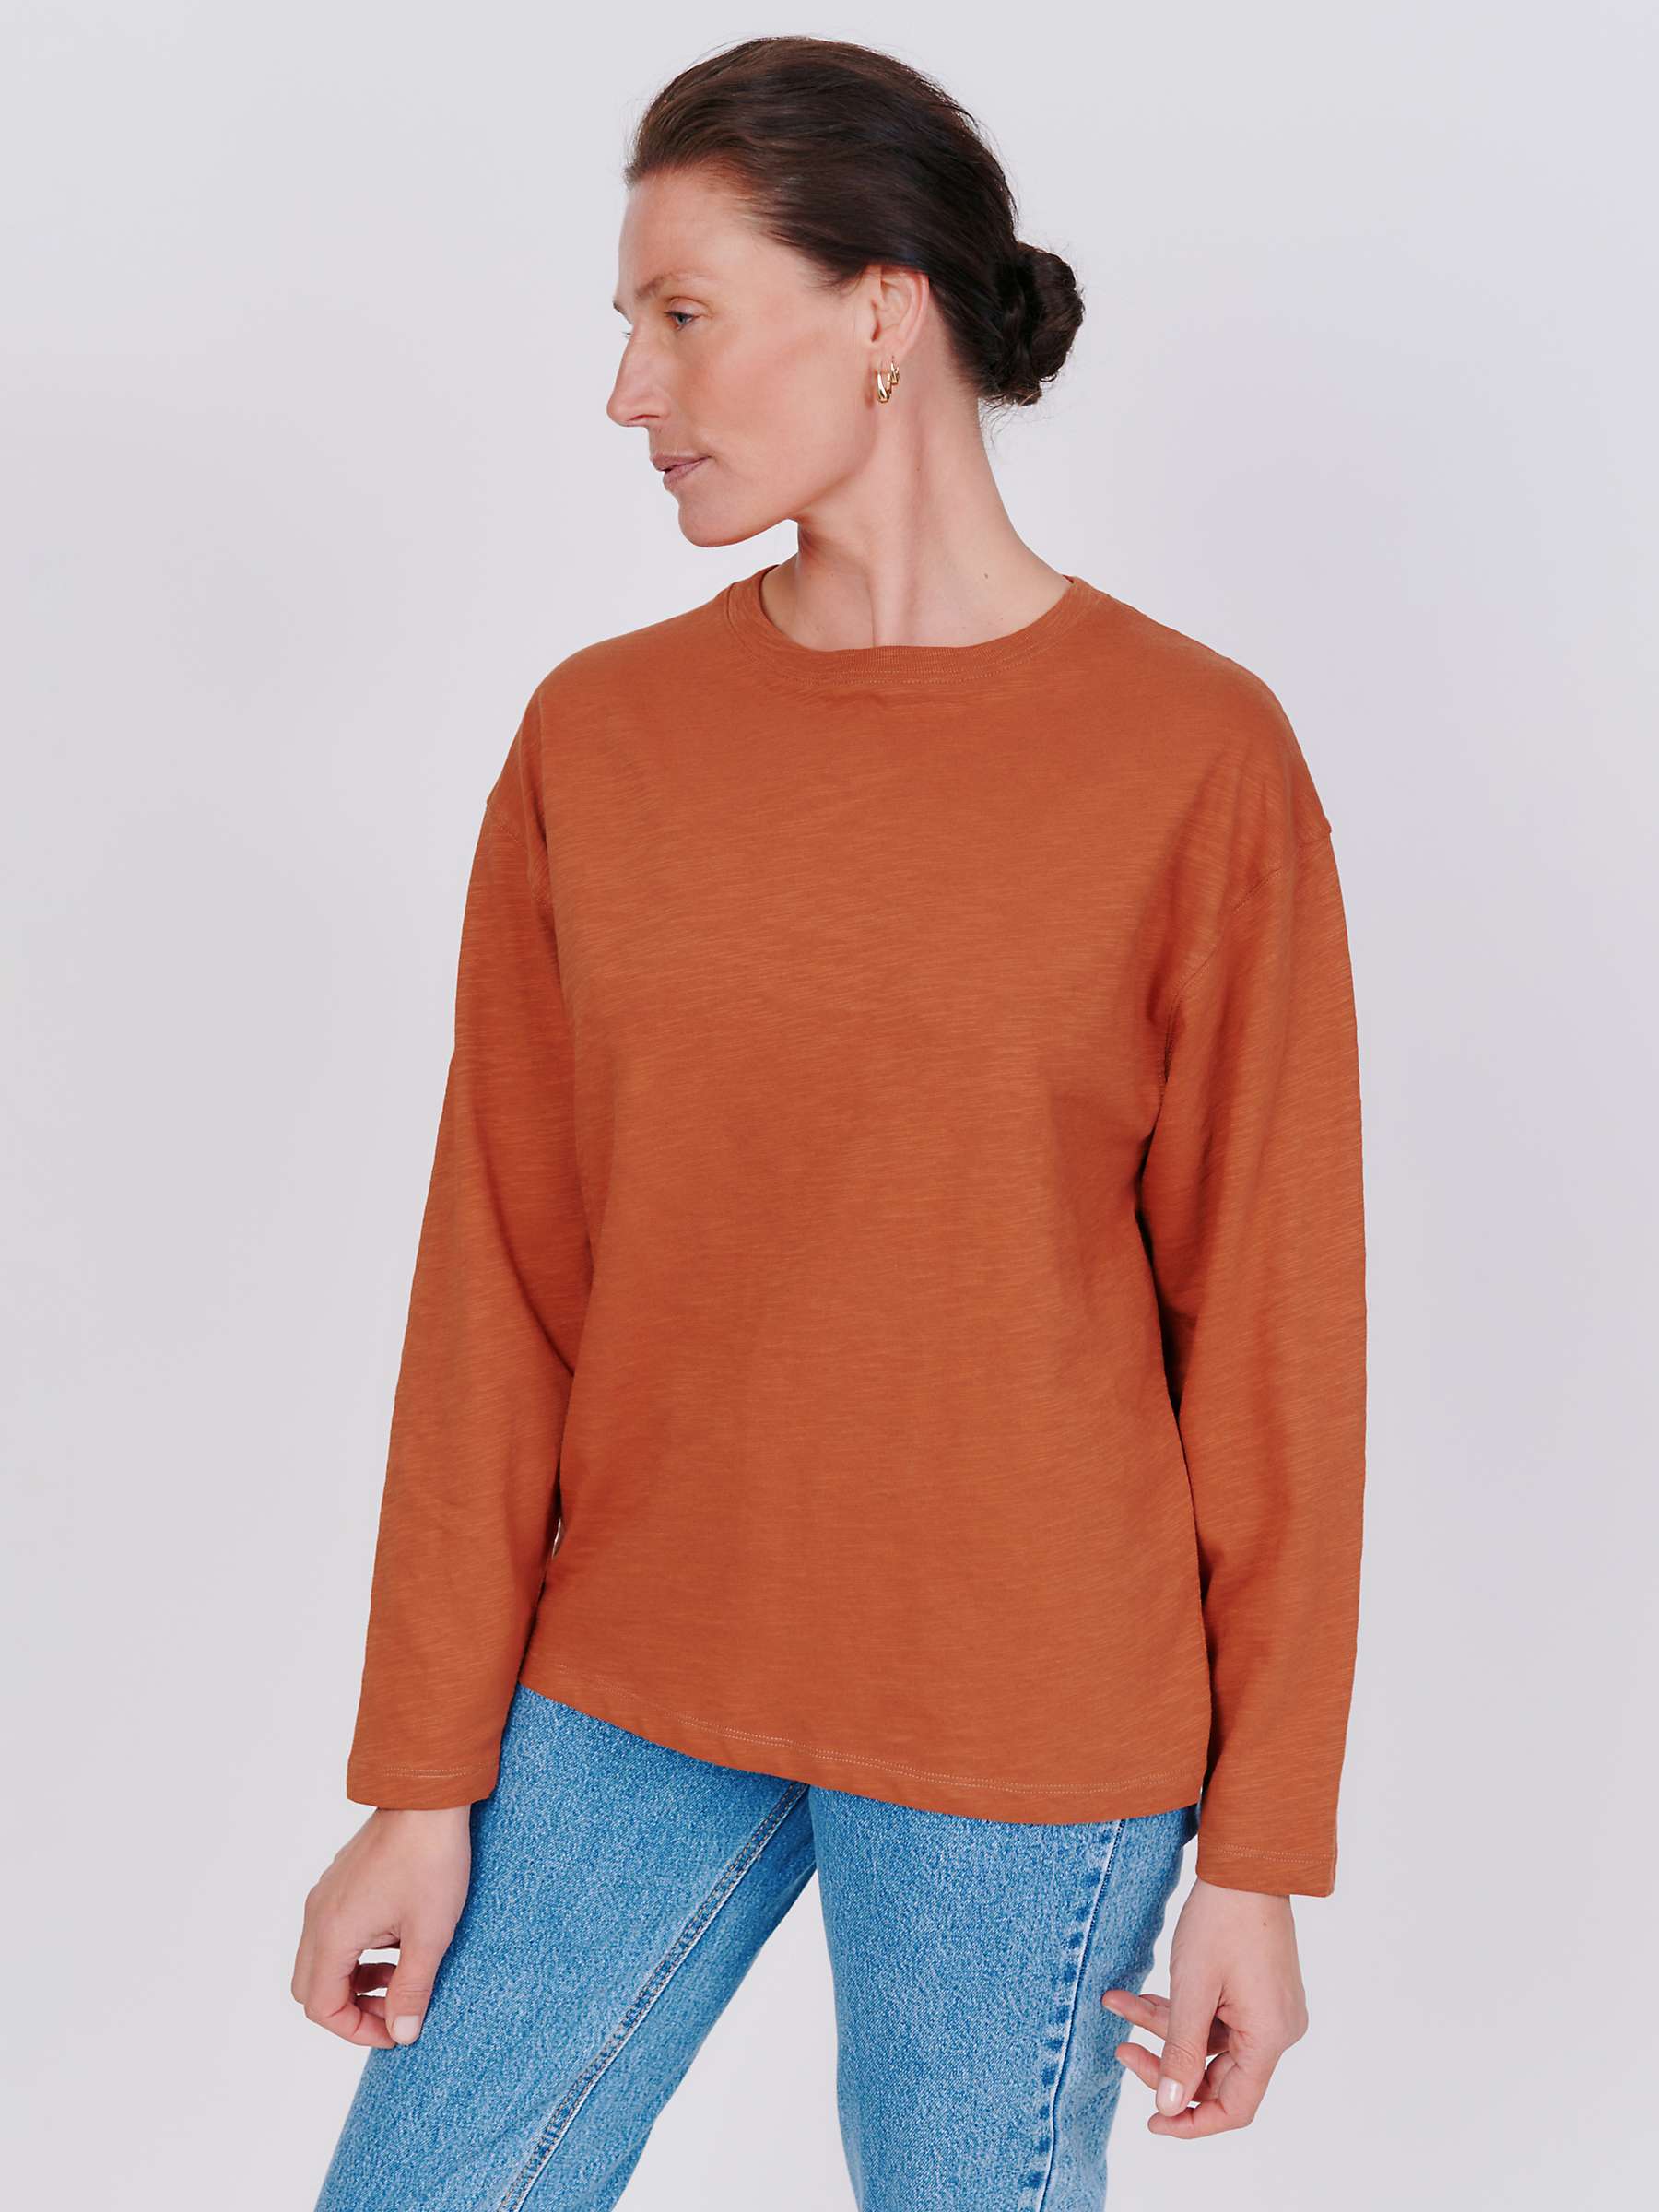 Buy Vivere By Savannah Miller Mae Cotton Jersey Top, Rust Online at johnlewis.com